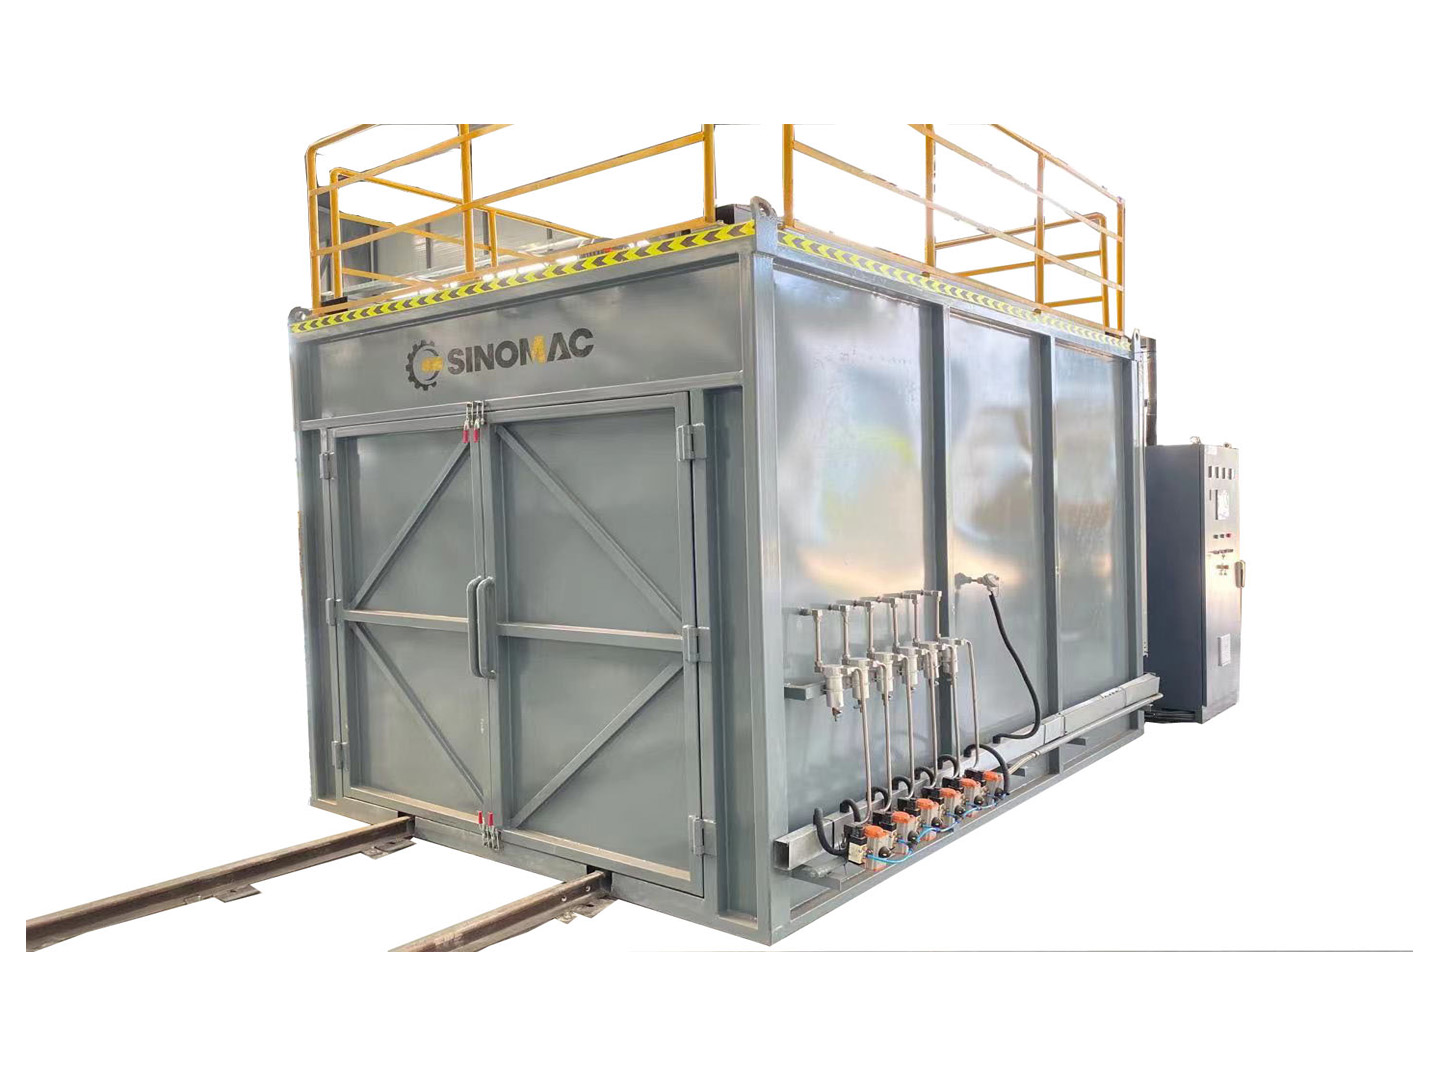 Composite curing oven